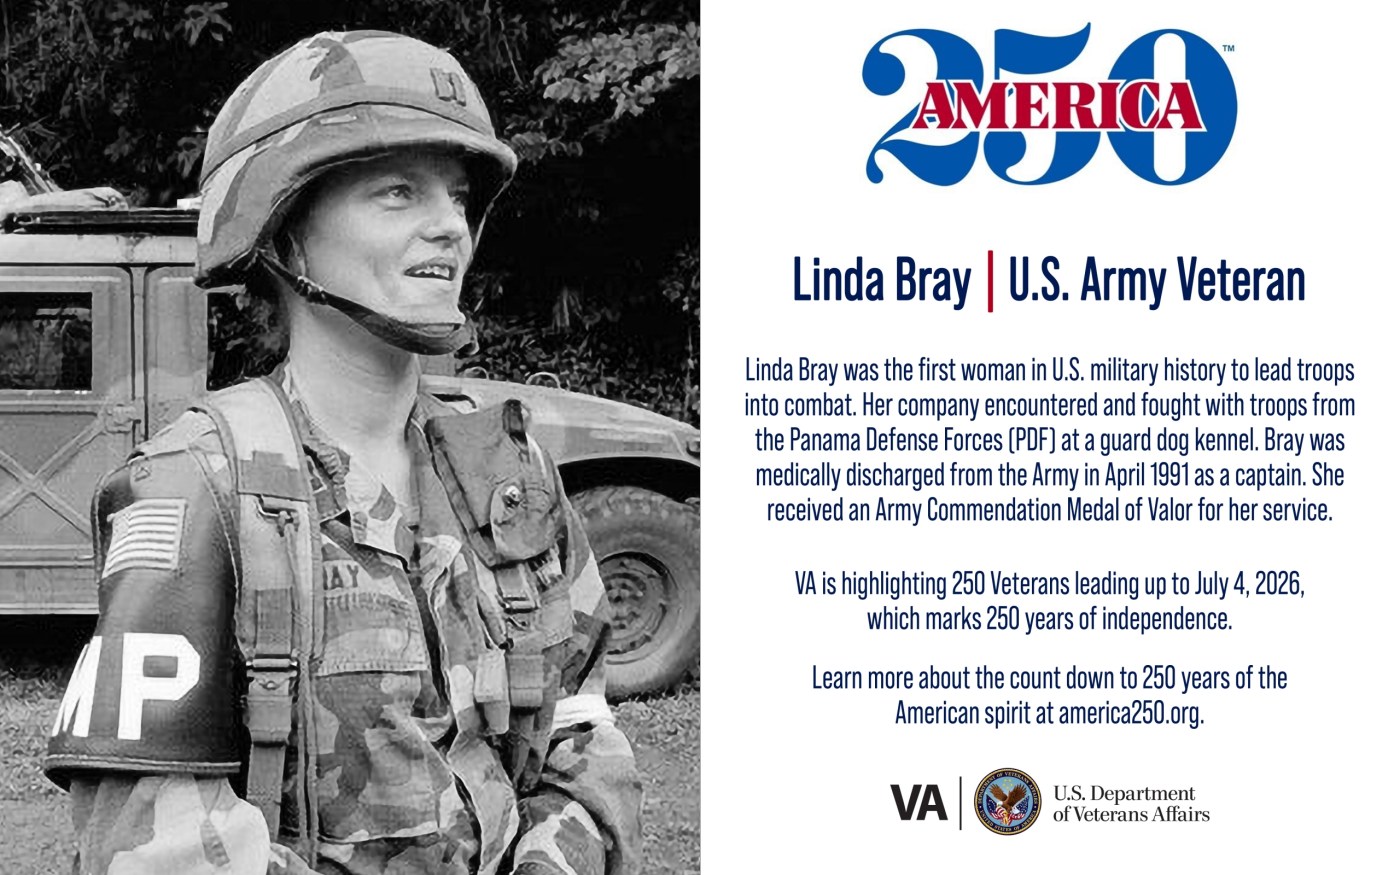 This week’s America250 salute is Army Veteran Linda Bray, who was the first woman in the United States military to lead troops into combat.